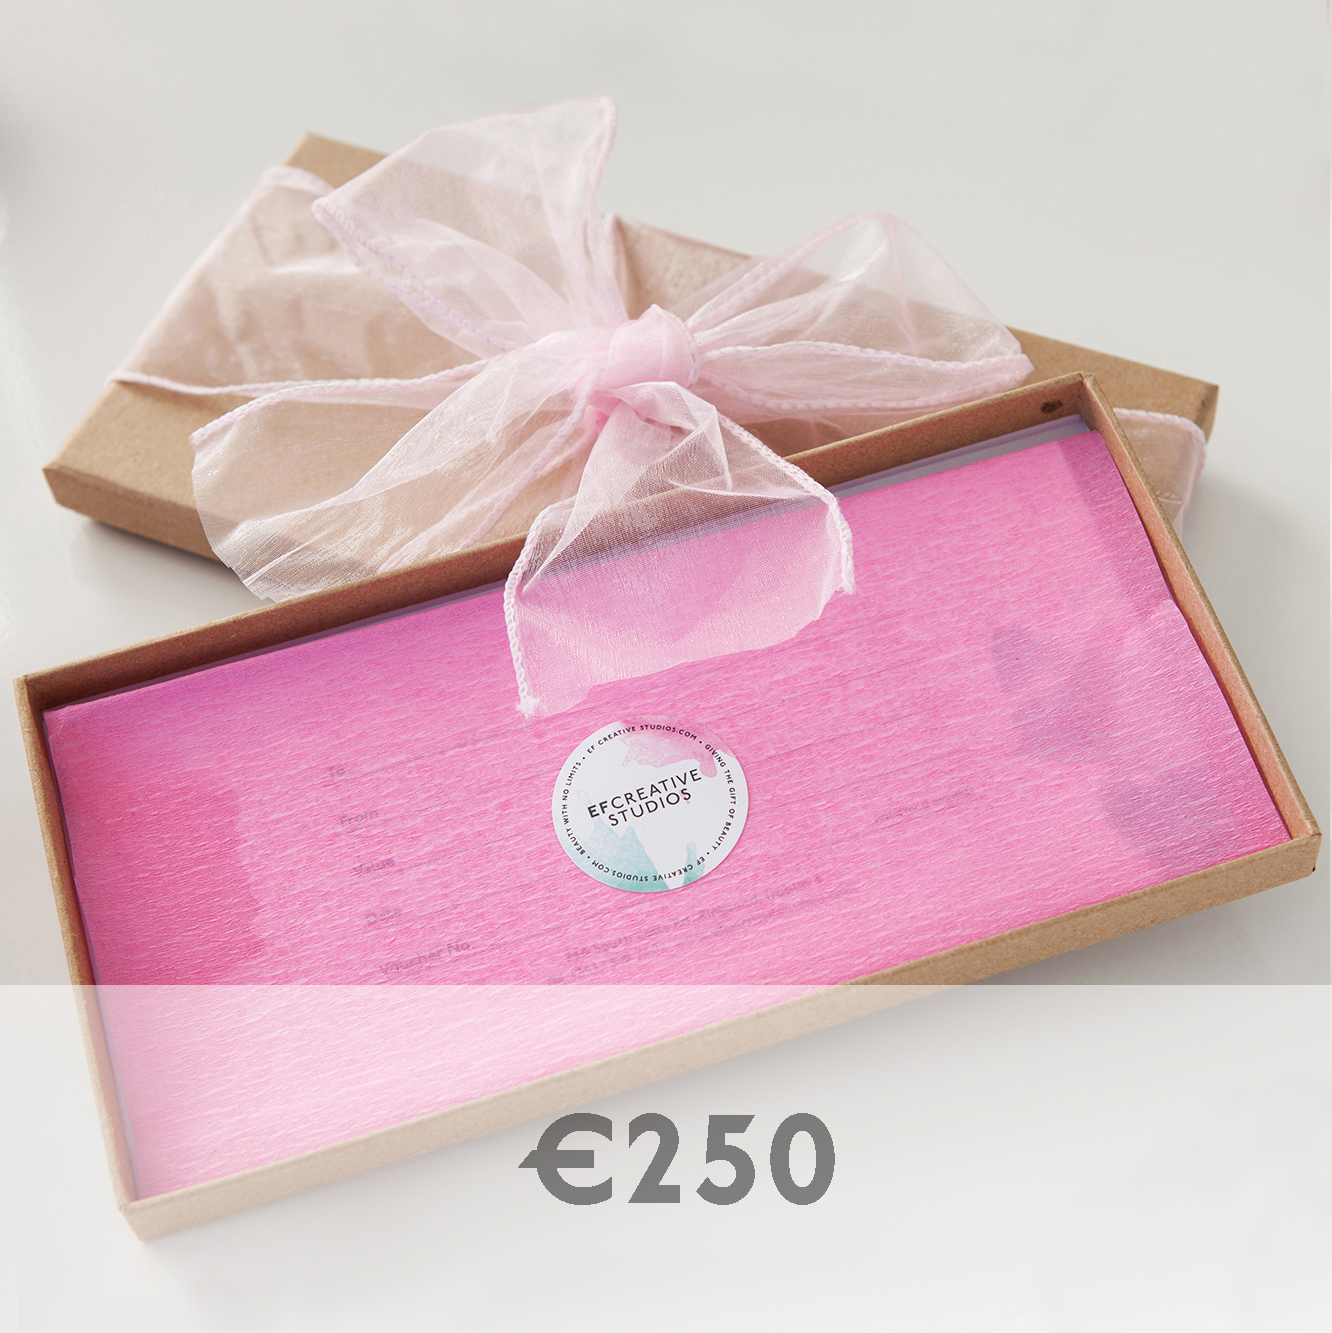 Two hundred and fifty euro gift idea for beauty lovers